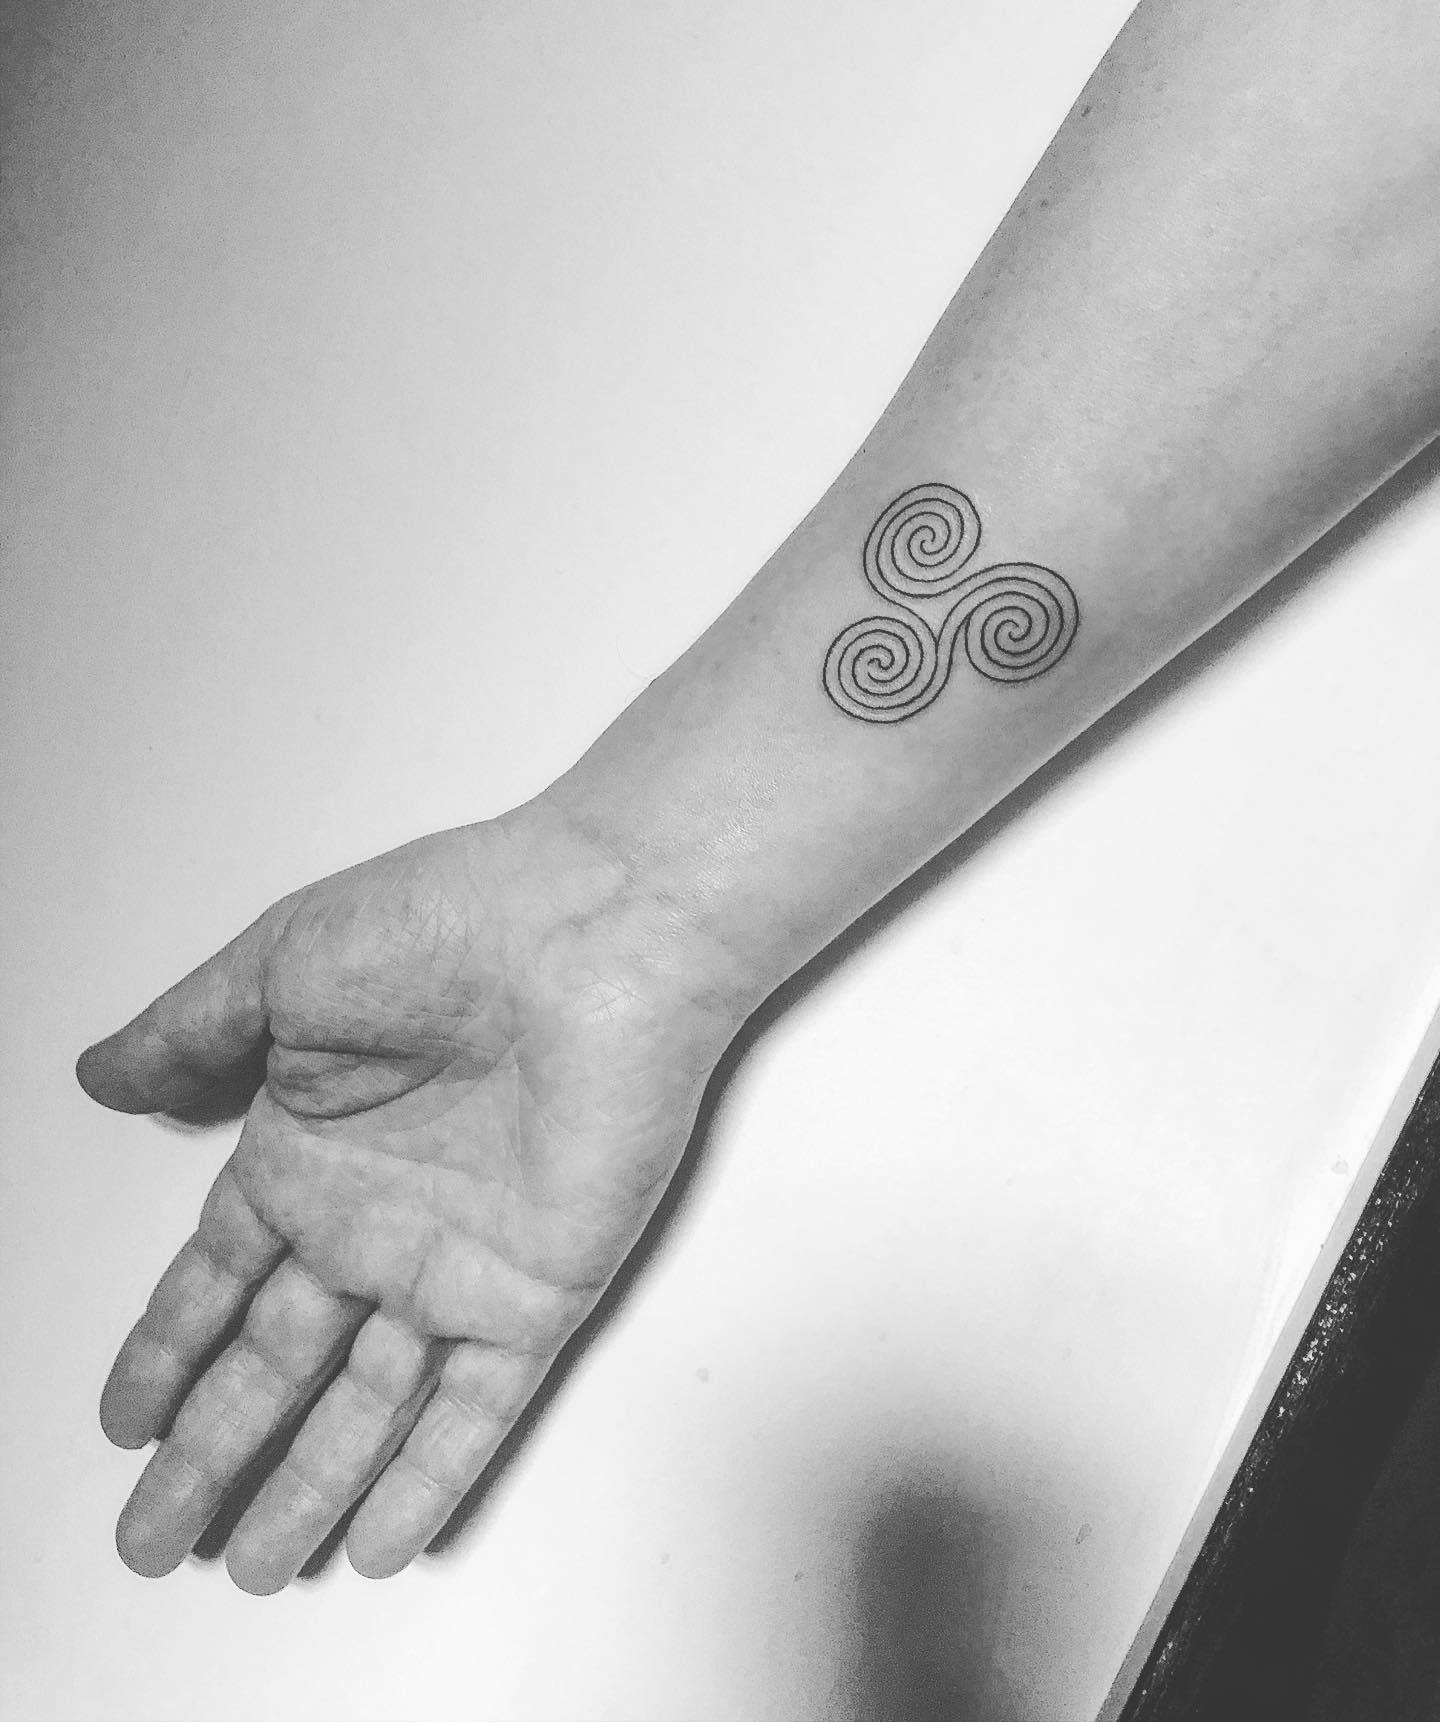 Triskelion Tattoo Meaning - What Does the Triskelion Symbolize? - Next  Luxury